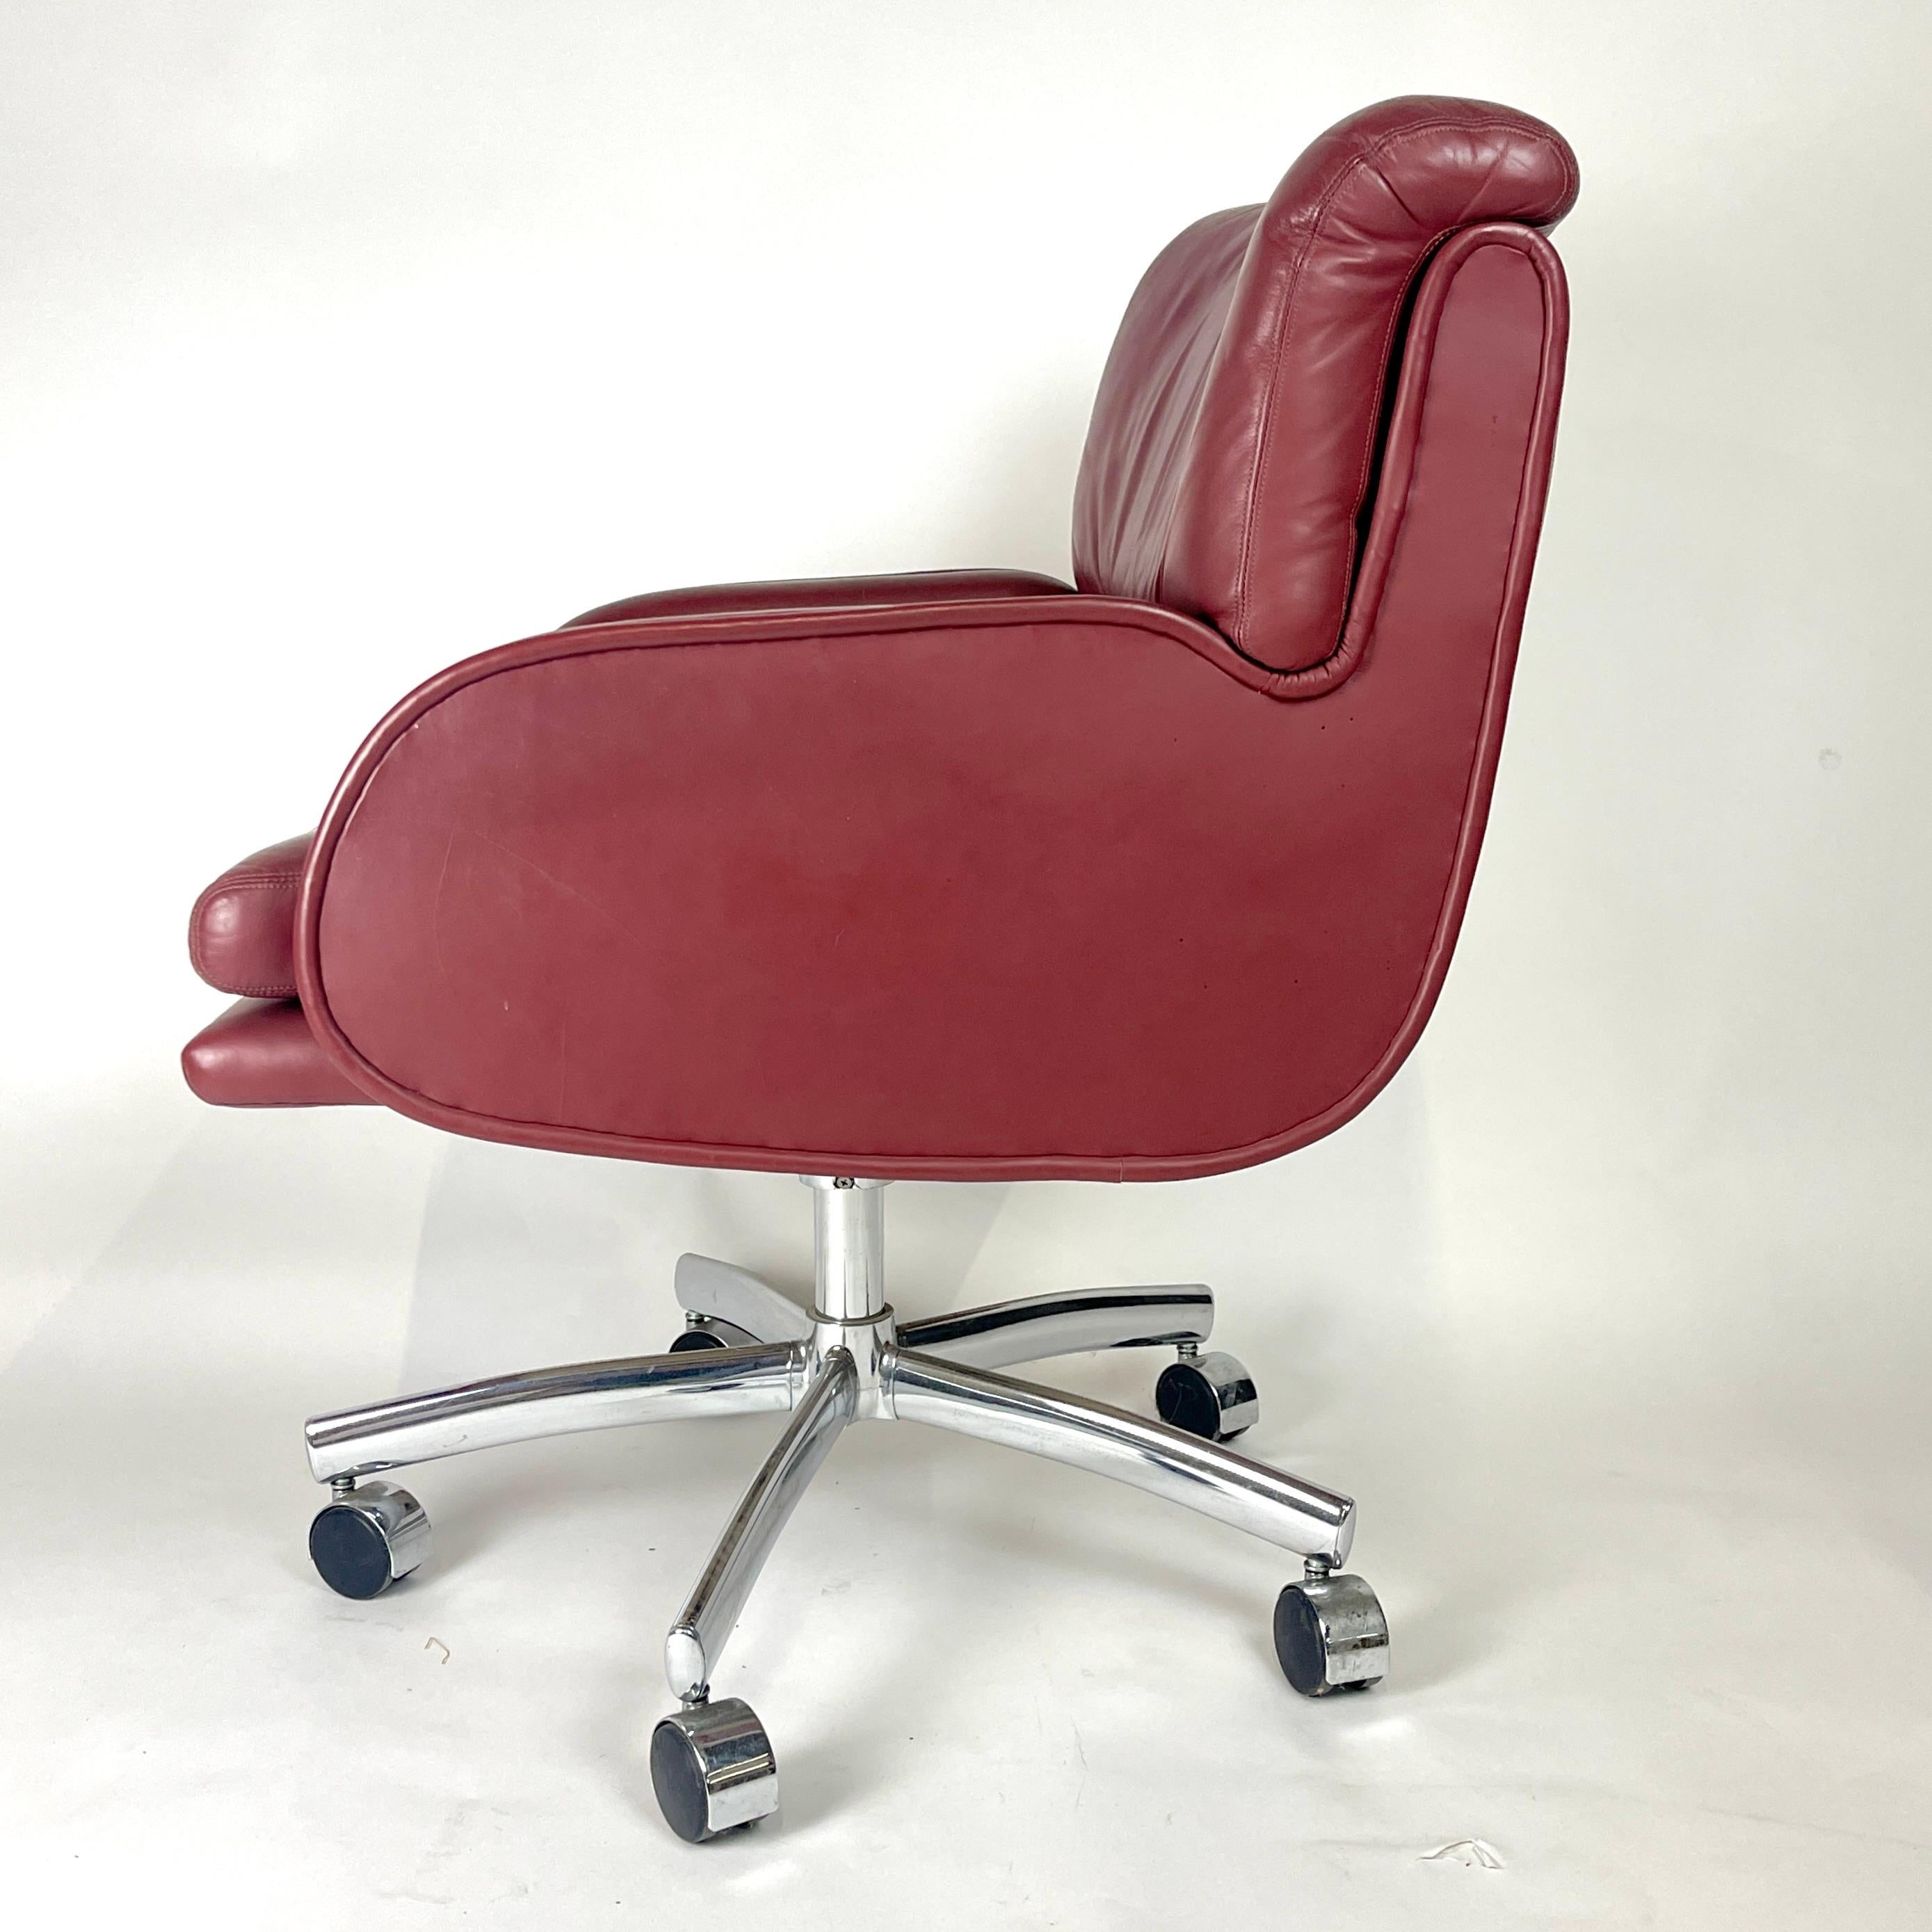 20th Century Roger Lee Sprunger for Dunbar Elegant Leather Office Chairs 10 Available For Sale